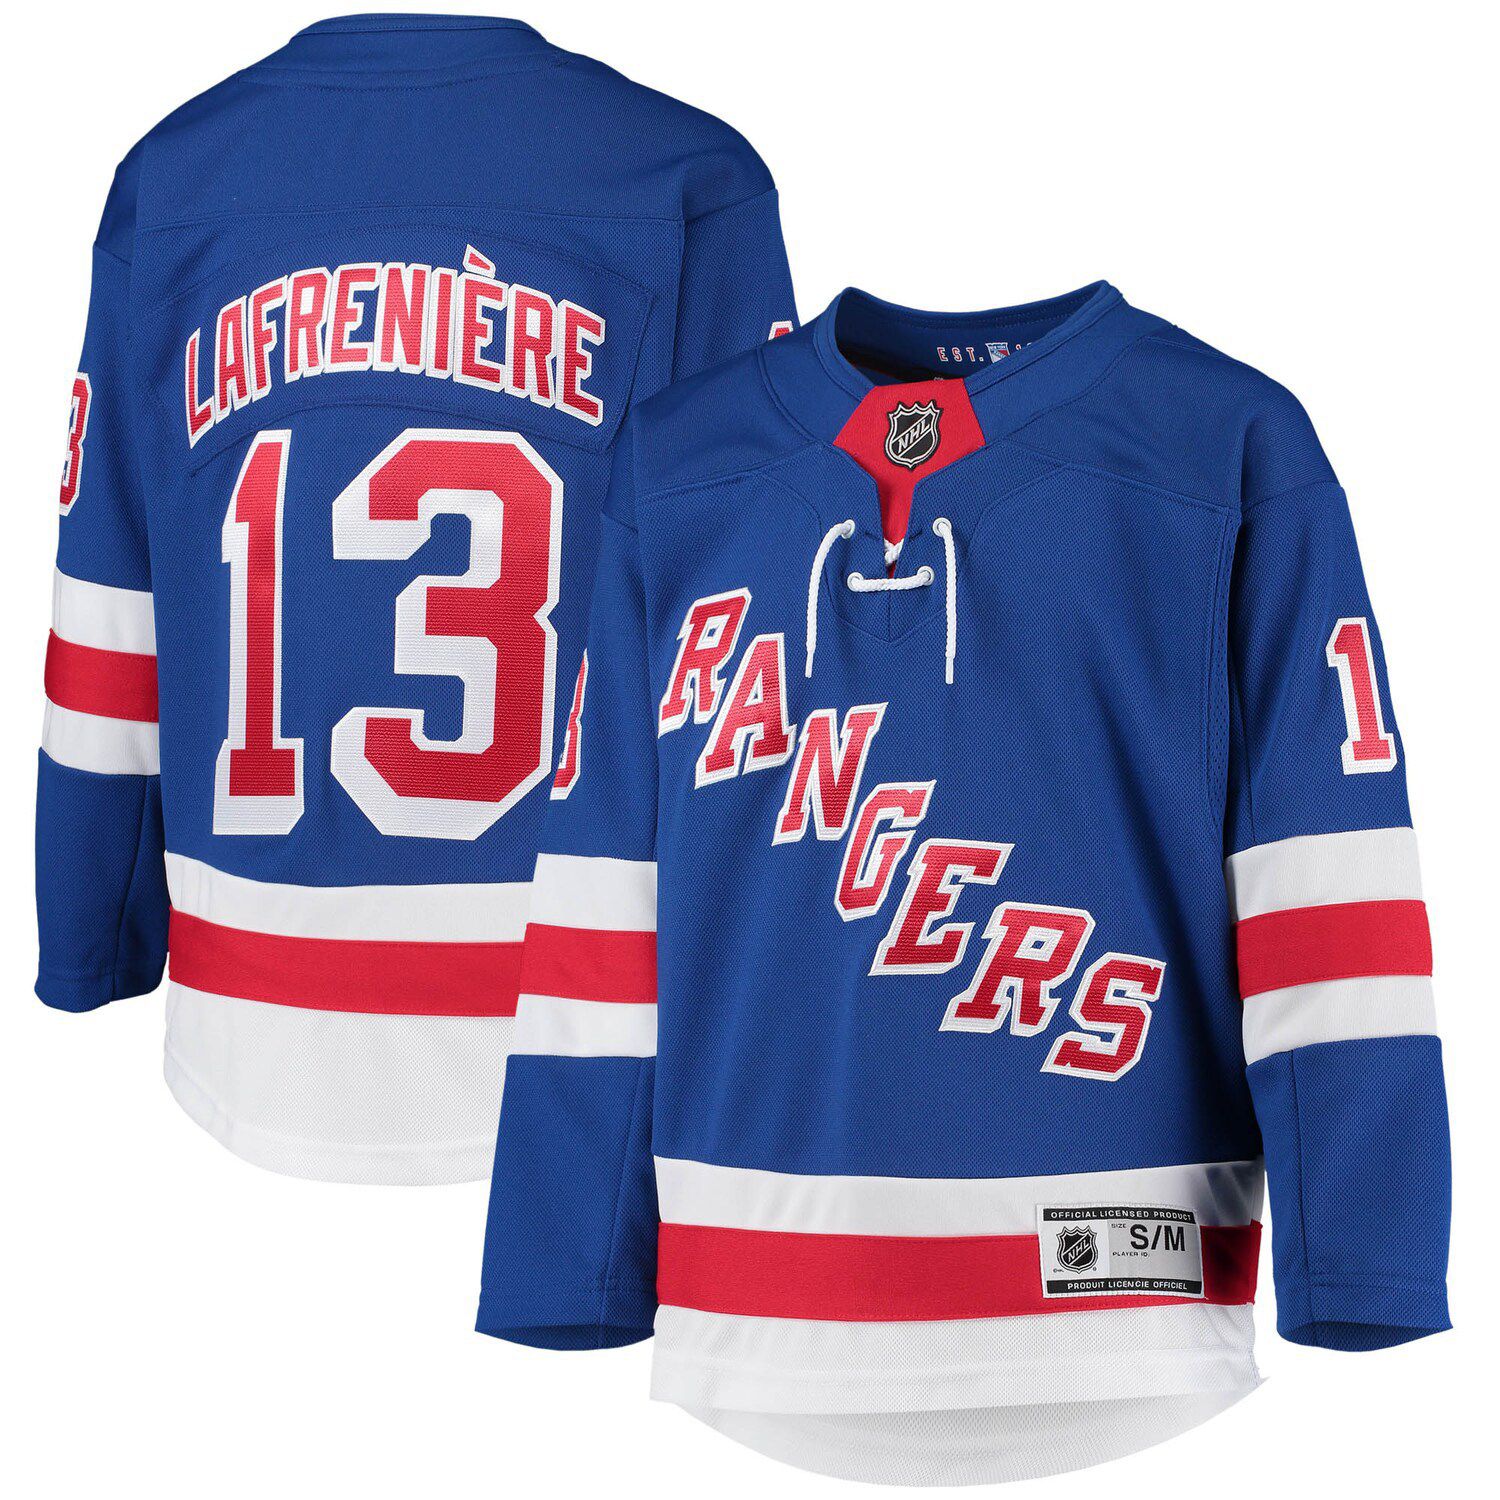 Outerstuff Youth Mika Zibanejad Blue New York Rangers Home Replica Player Jersey